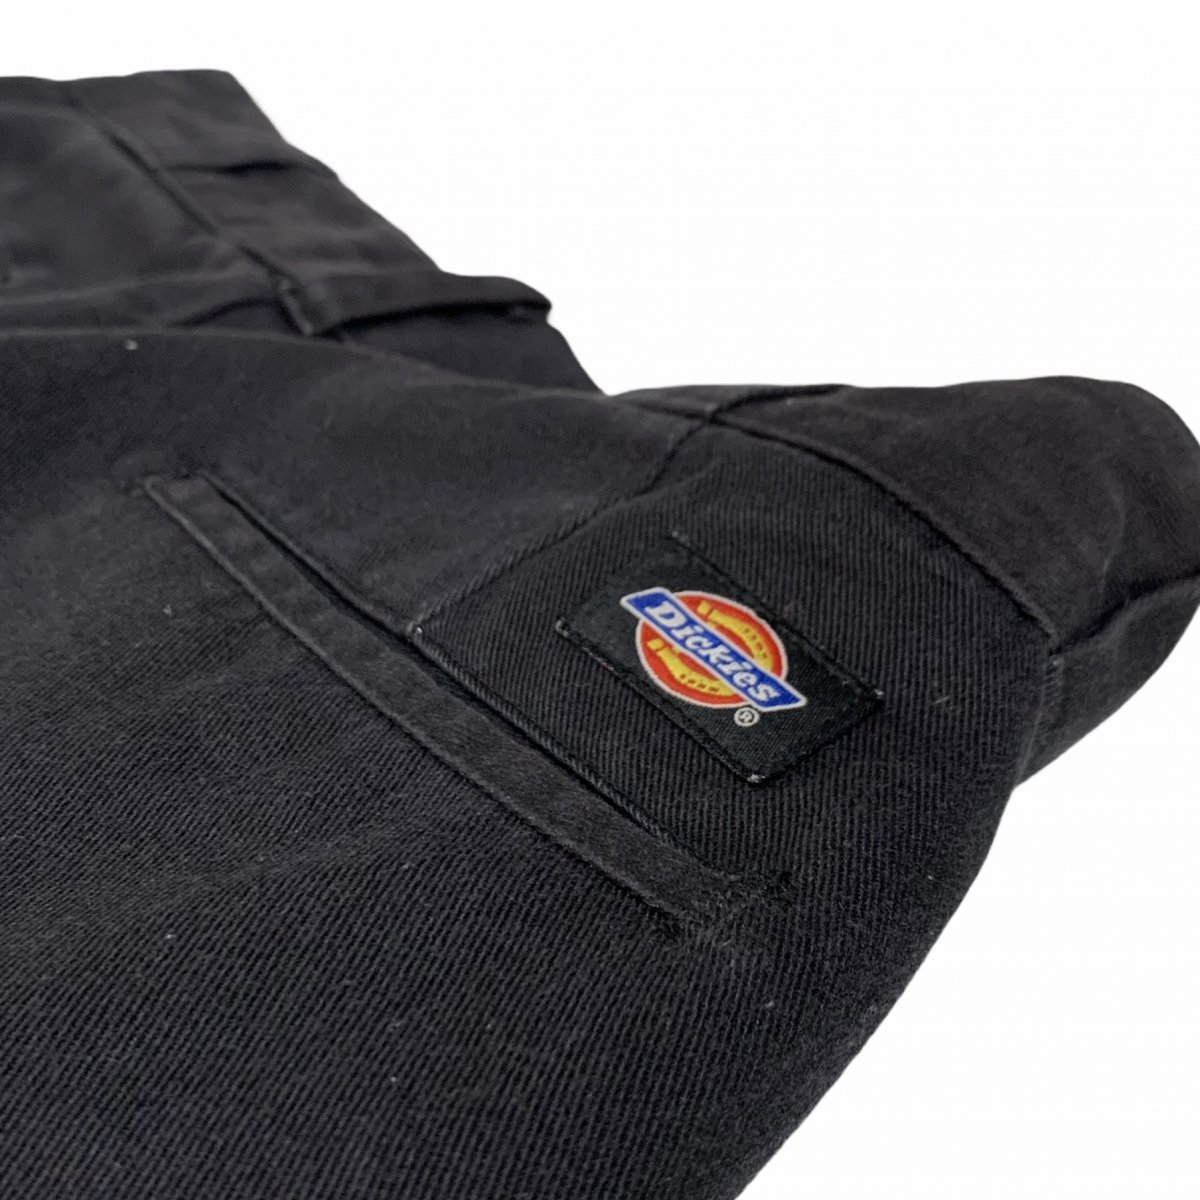 USA製 90s Dickies 874 Work Pants 黒 W32×L30 ディッキーズ ワーク 